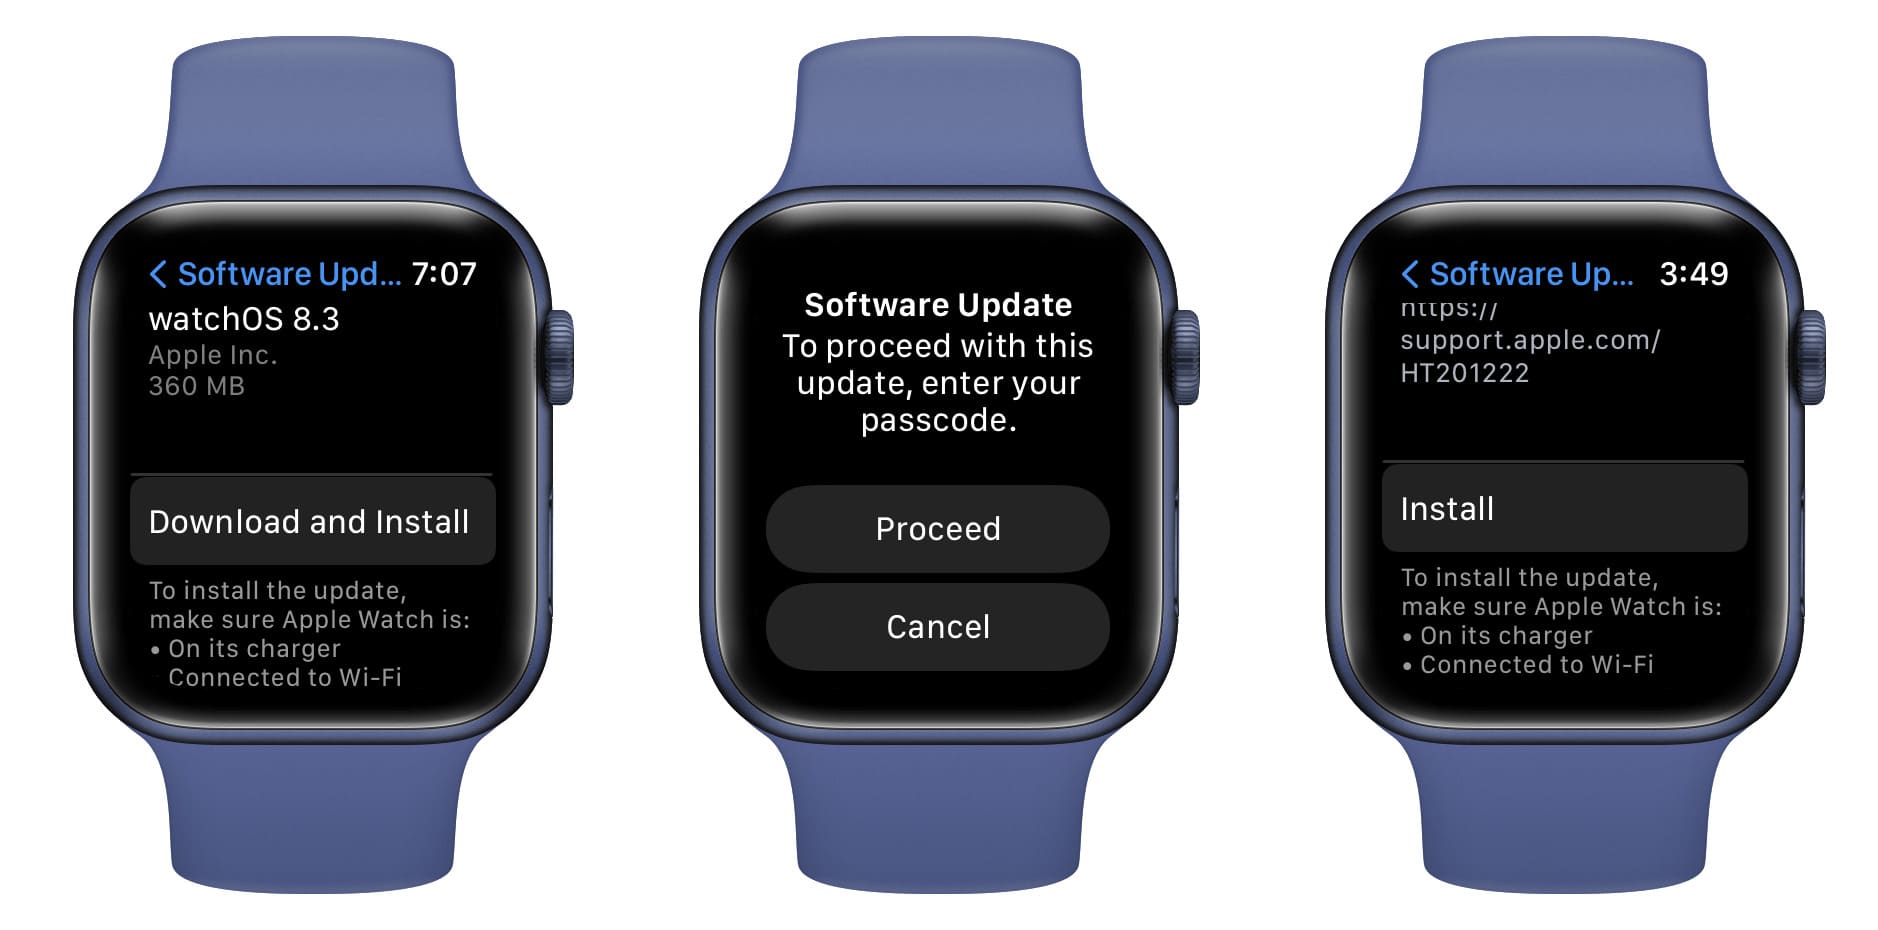 Download and Install update on Apple Watch